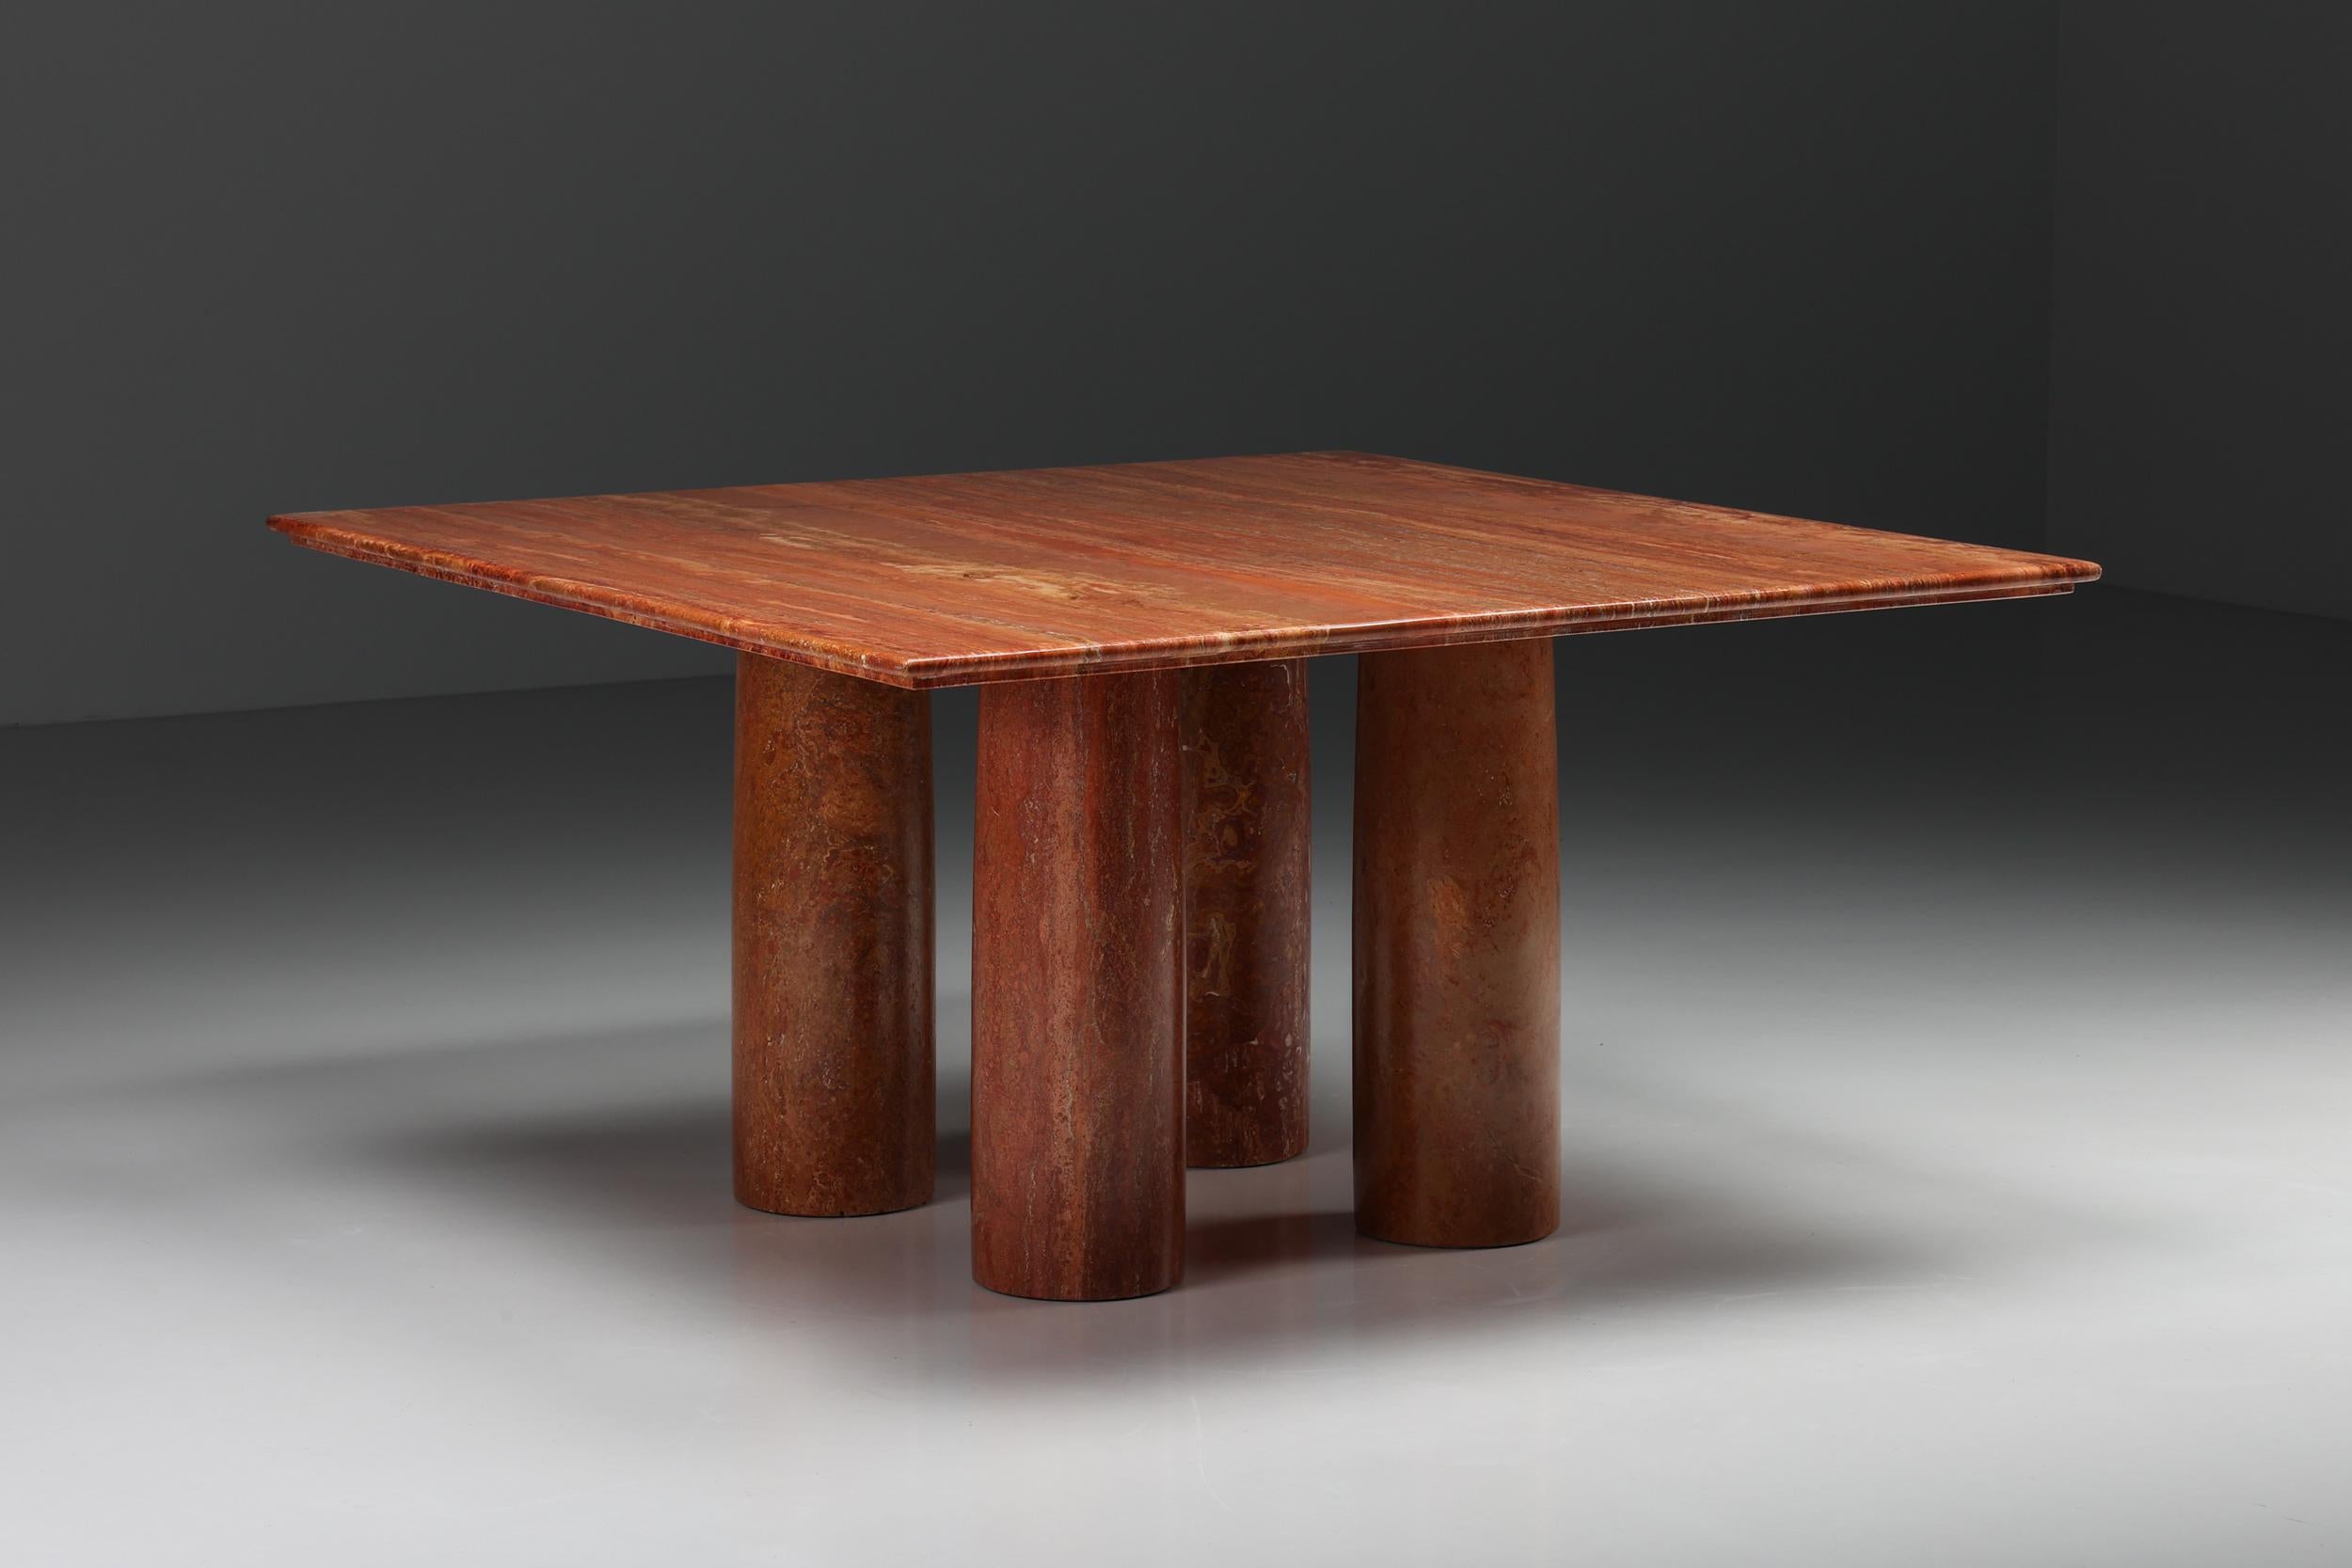 Mario Bellini 'Il Colonato' table, red travertine, Italy, 1970s.

For this series of tables, Bellini was inspired by ancient Roman columns. This table consists of four cylindrical legs and this model features a square tabletop. The red colored